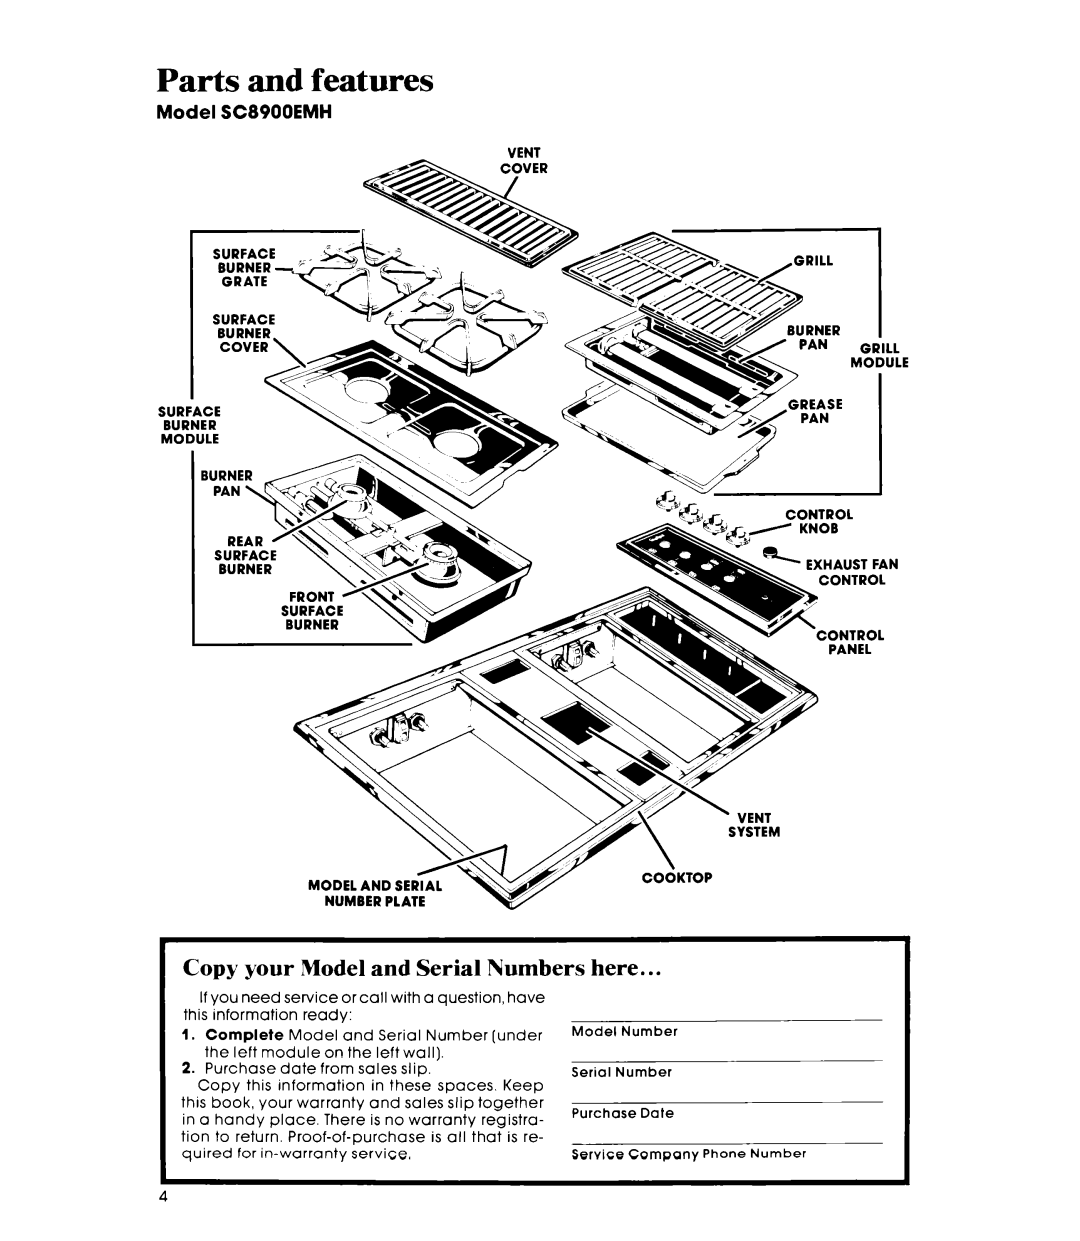 Whirlpool manual Parts and features, Copy your Model and Serial Numbers here, Model SC8900EMH 